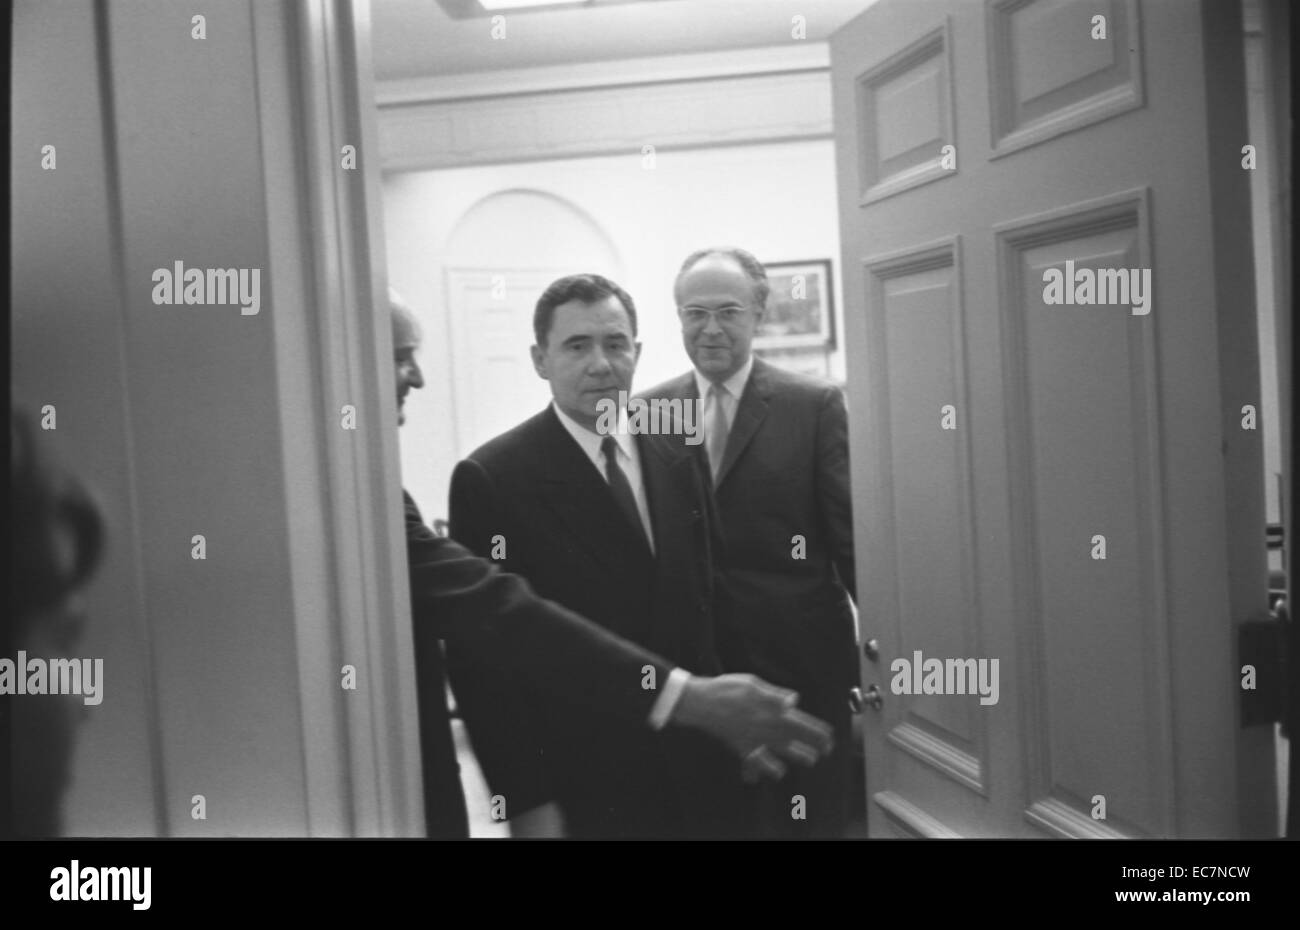 Soviet foreign minister Andrei Gromyko and Soviet Ambassador to the United States, Anatoly F. Dobrynin, walking through a door way at the White House in Washington, D.C. during the Cuban missile crisis. Stock Photo